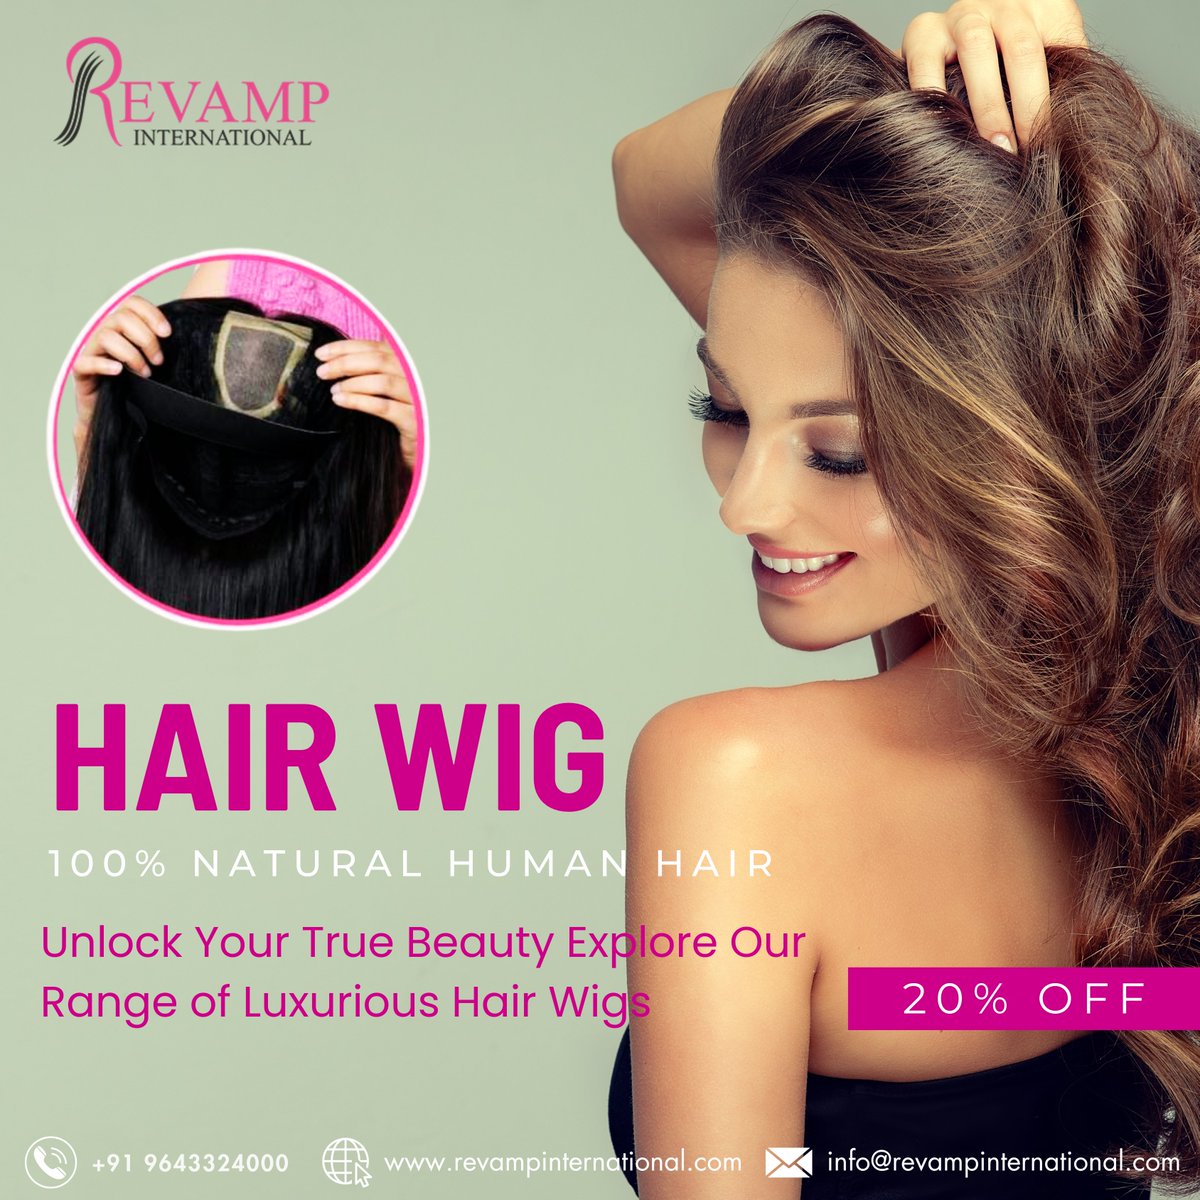 Introducing our premium quality Hair Wig from Revamp International.

Made with the finest materials, this wig offers a comfortable fit and a natural look that is sure to turn heads.

#hairwig #wiglife #wigstyle #wigfashion #wigsforwomen #wigaddict #wigslayer #hairtransformation